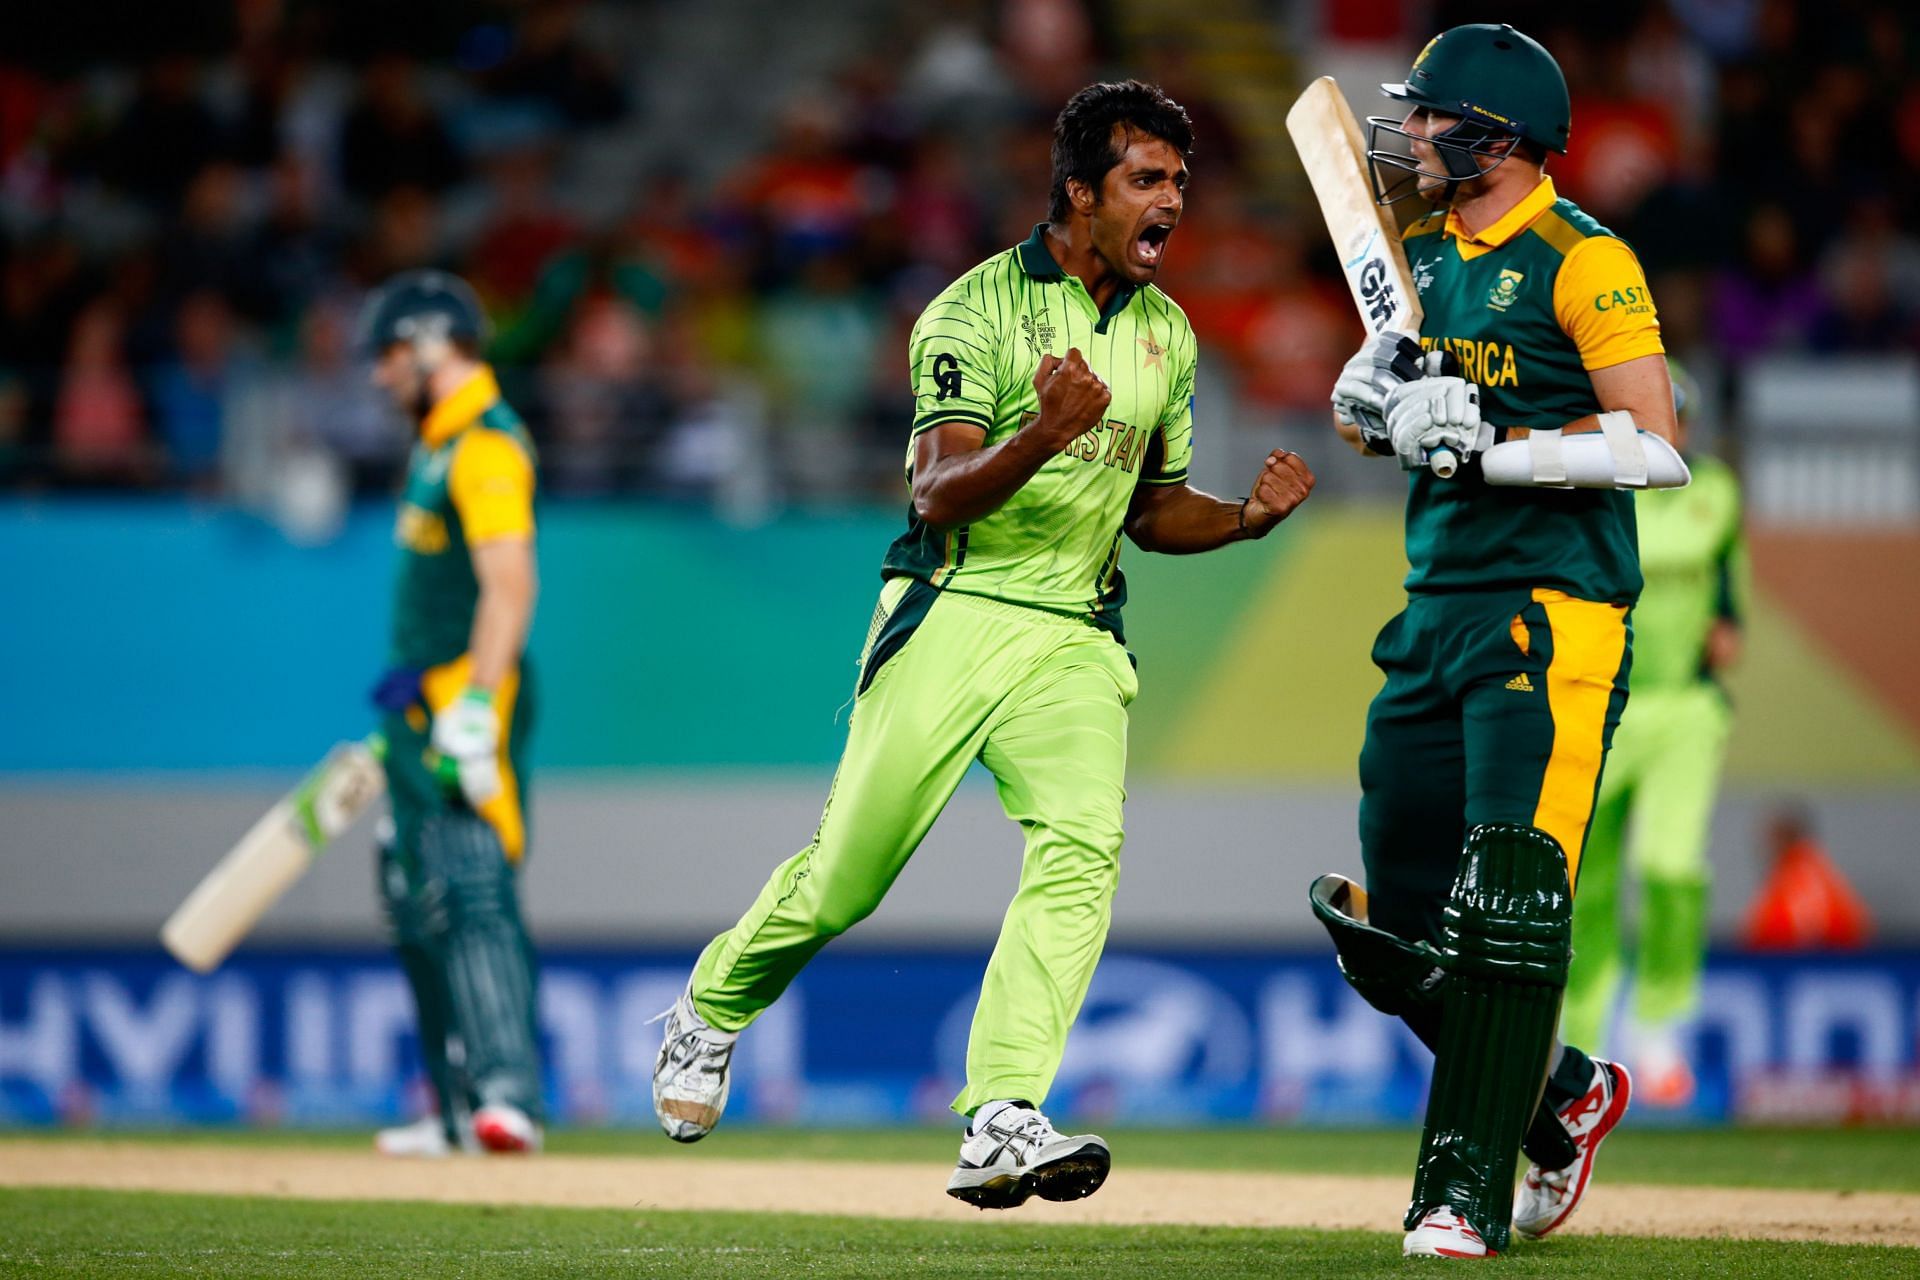 South Africa vs Pakistan - 2015 ICC Cricket World Cup